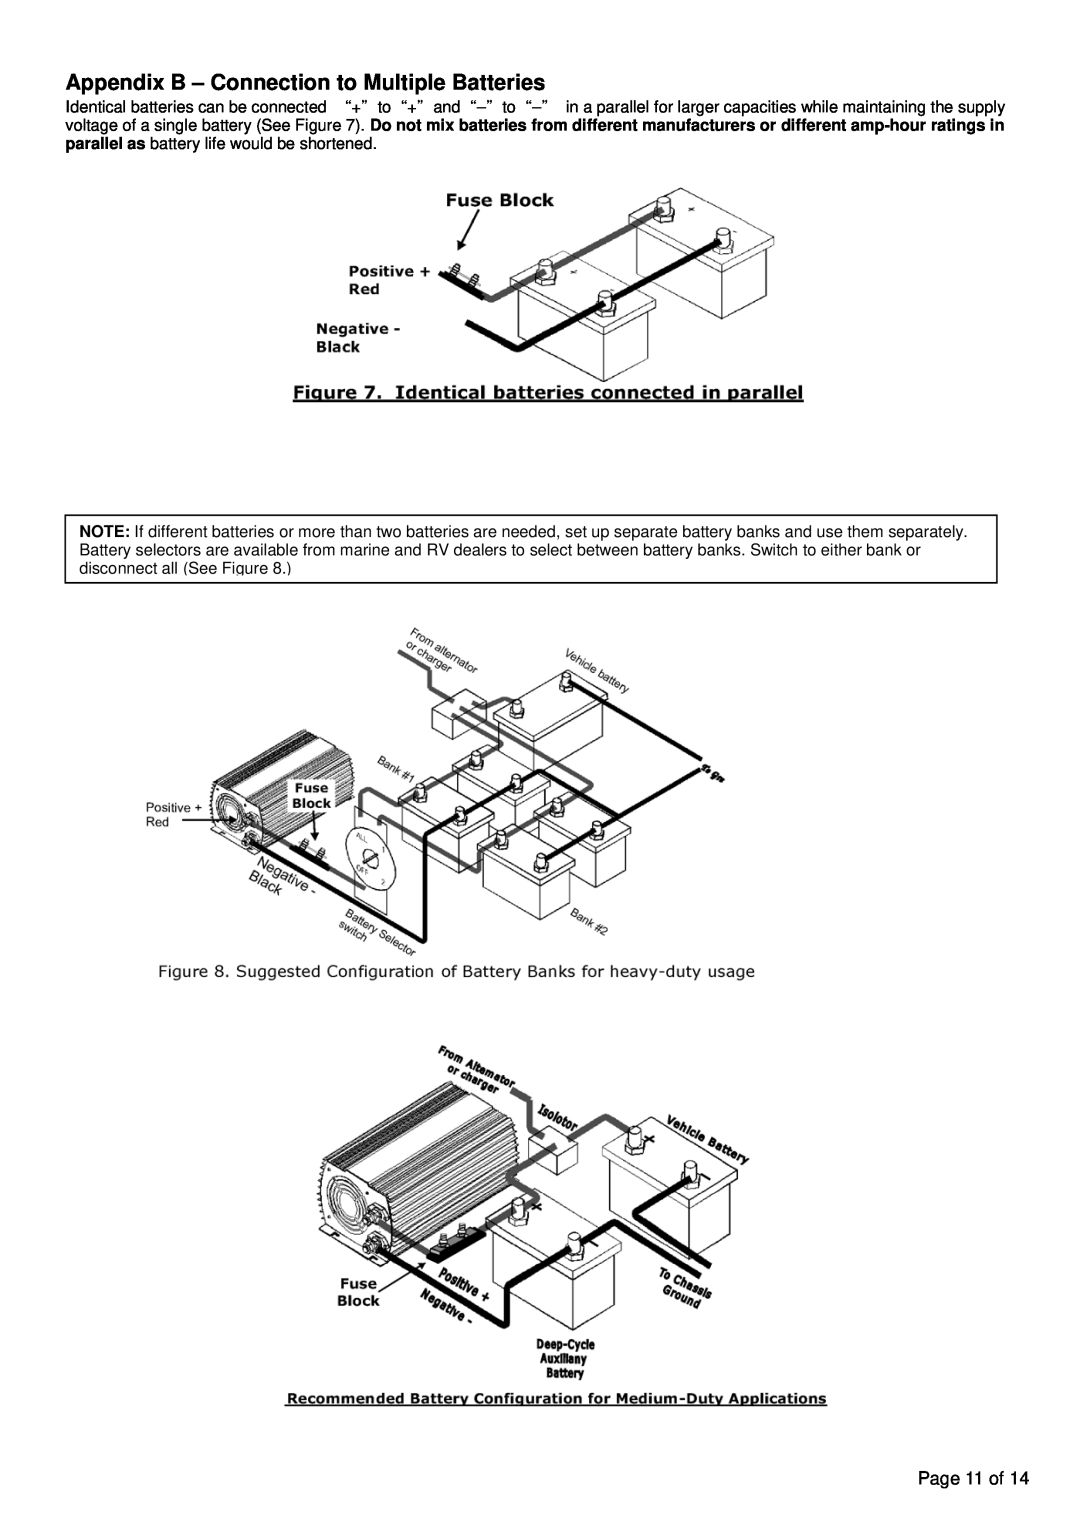 Sima Products STP-3000 owner manual Appendix B - Connection to Multiple Batteries, Page 11 of 